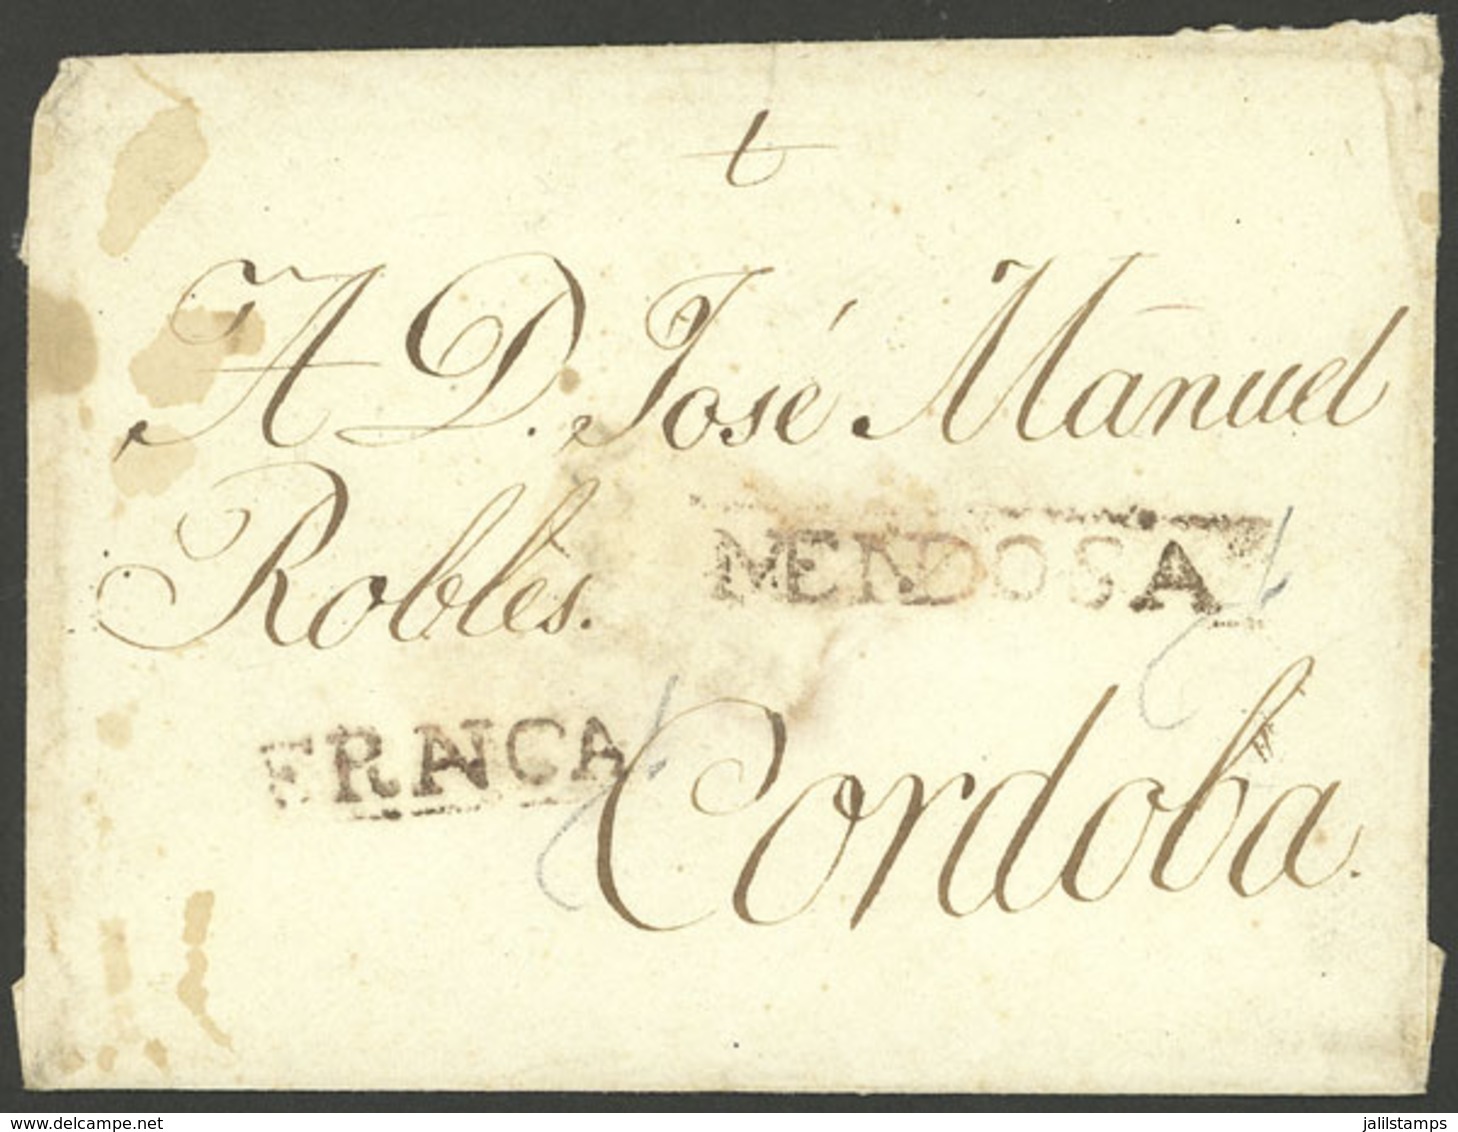 ARGENTINA: Circa 1826, Cover Sent To Córdoba, With Marks "MENDOSA" And "FRANCA" (GJ.MEN 2 And MEN 3A) Both In Rust Red A - Voorfilatelie